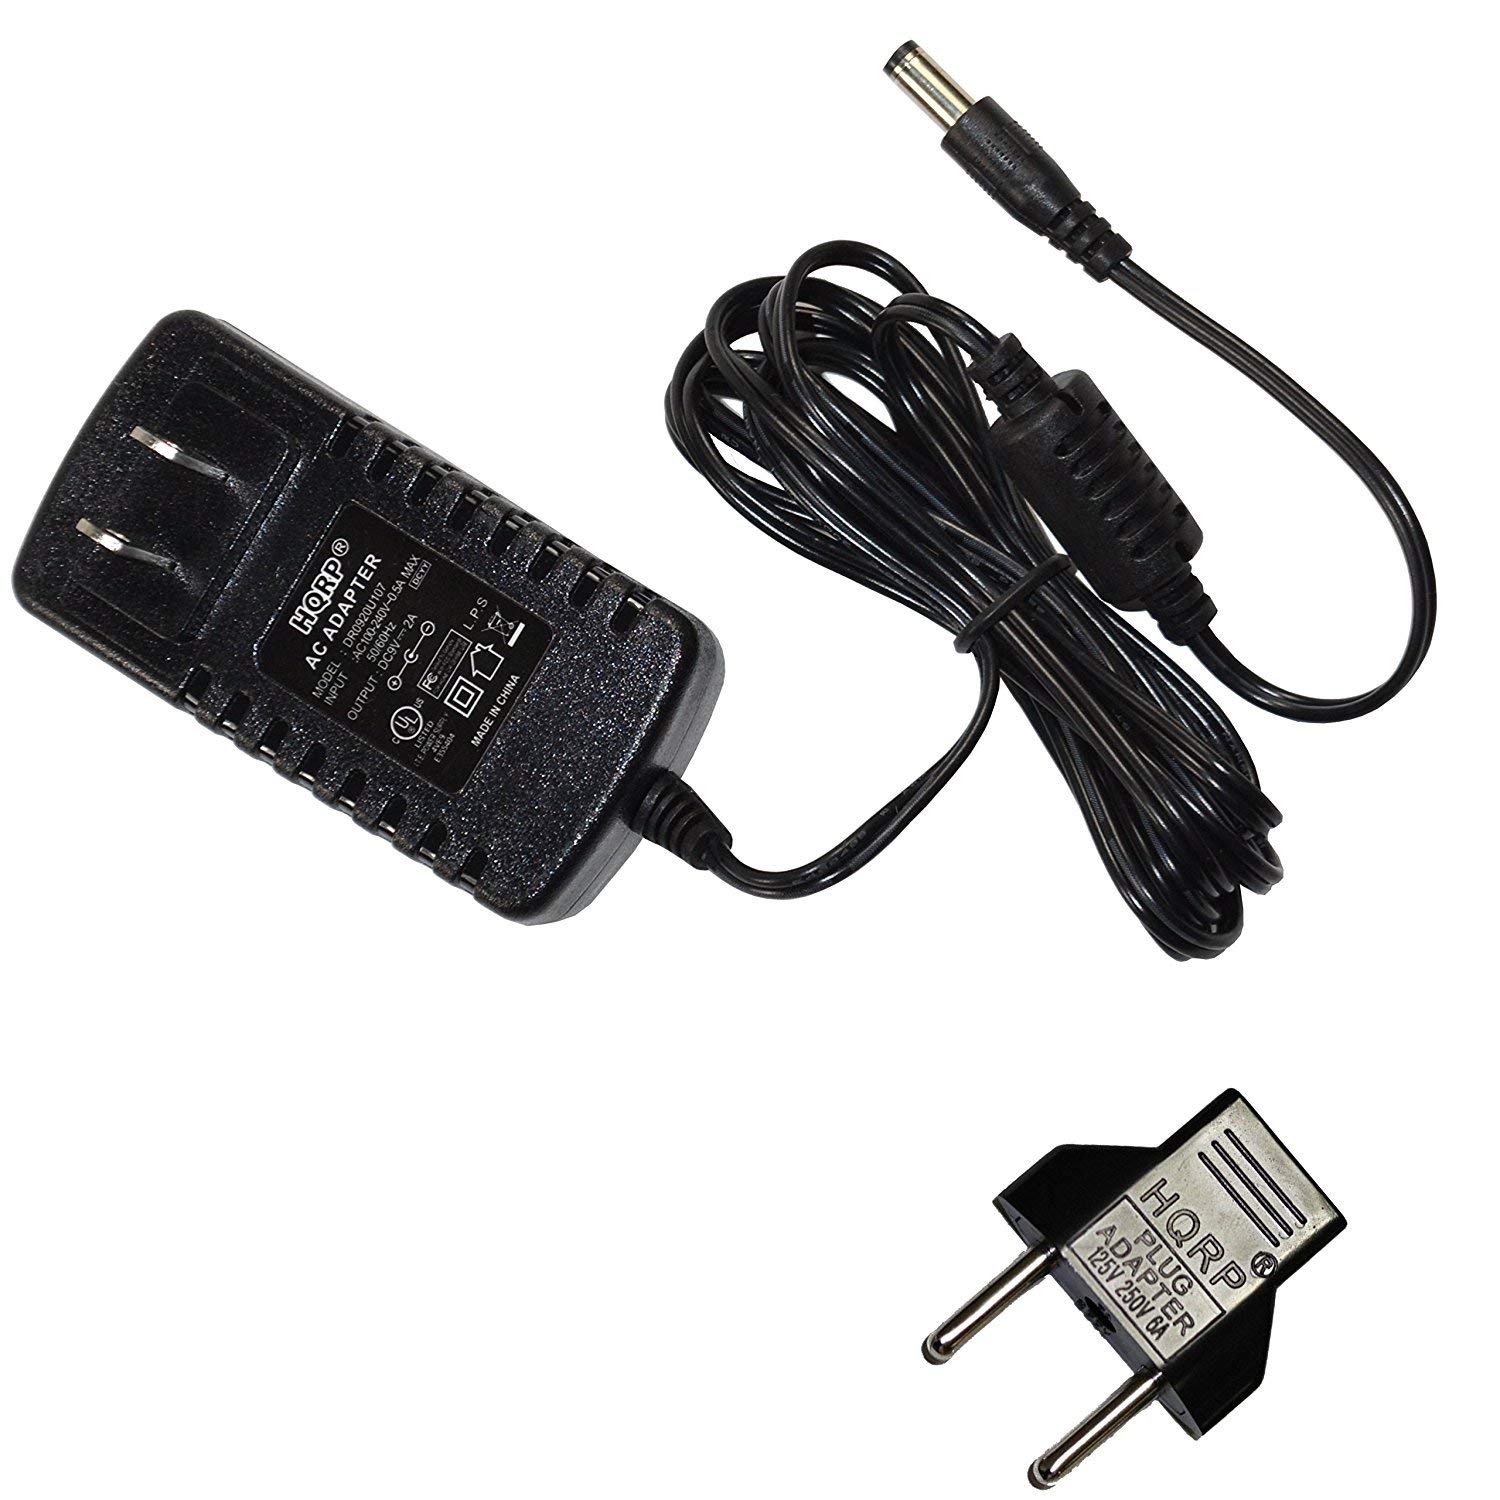 HQRP AC Adapter / Power Supply for DYMO Rhino 3000, 4200, 5000, 5200, 6000, 6500 Electronic Labelmaker / Labeling System plus Euro Plug Adapter